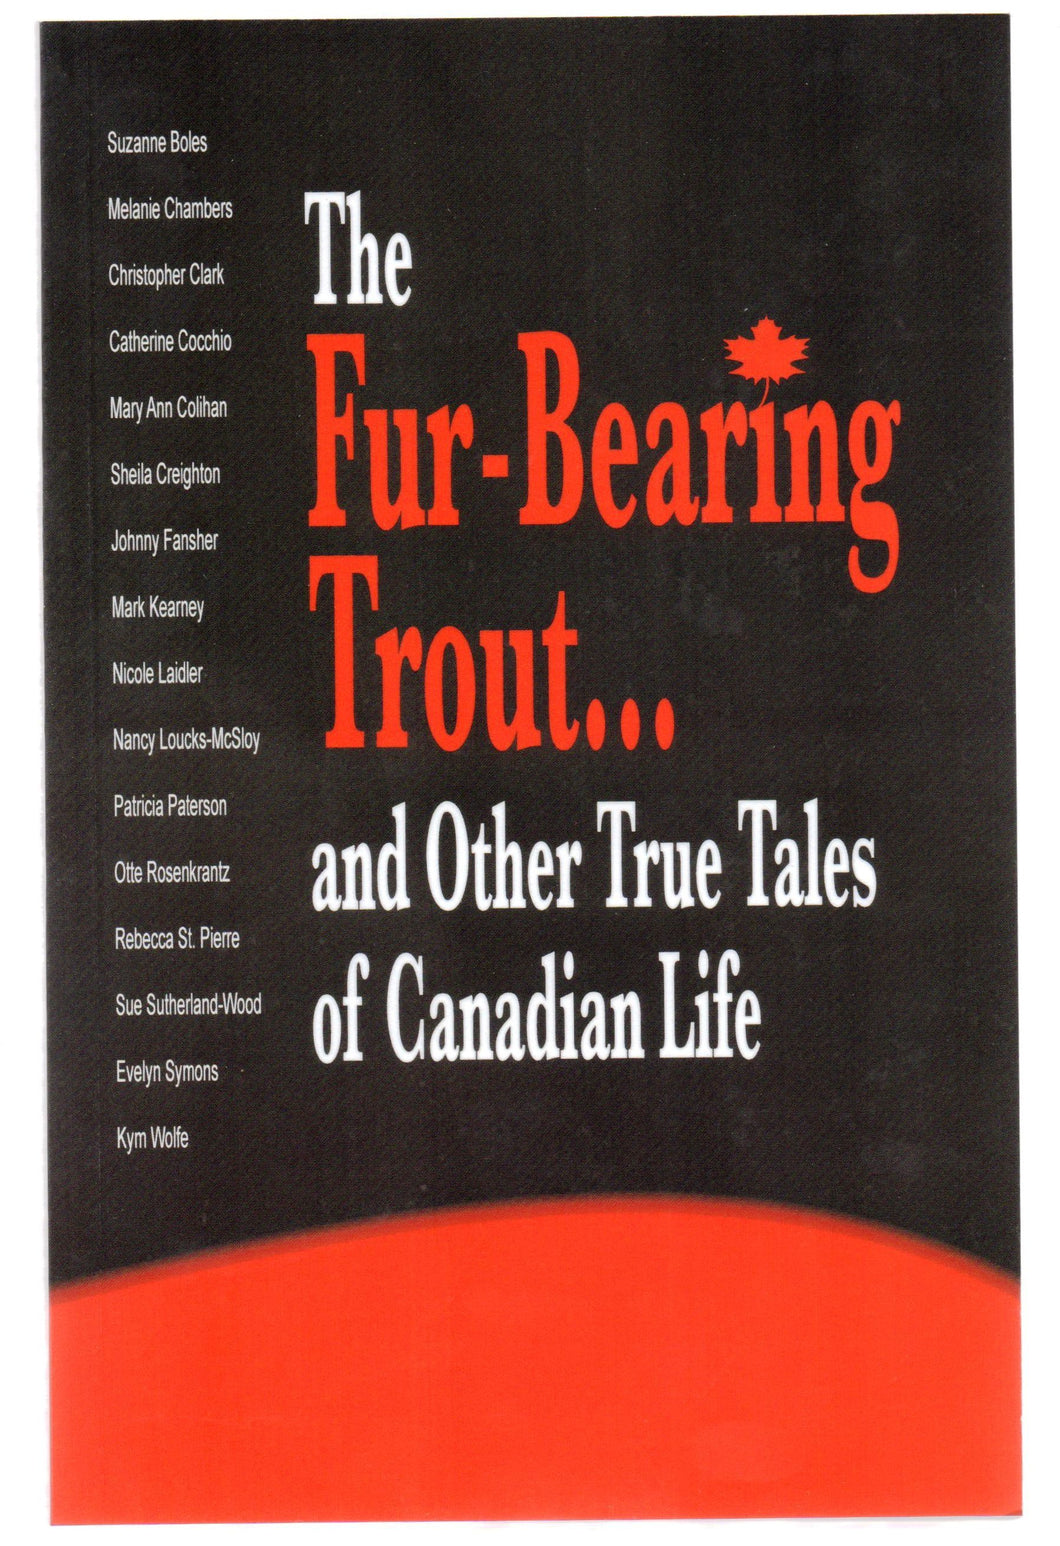 The Fur-Bearing Trout ... and Other True Tales of Canadian Life